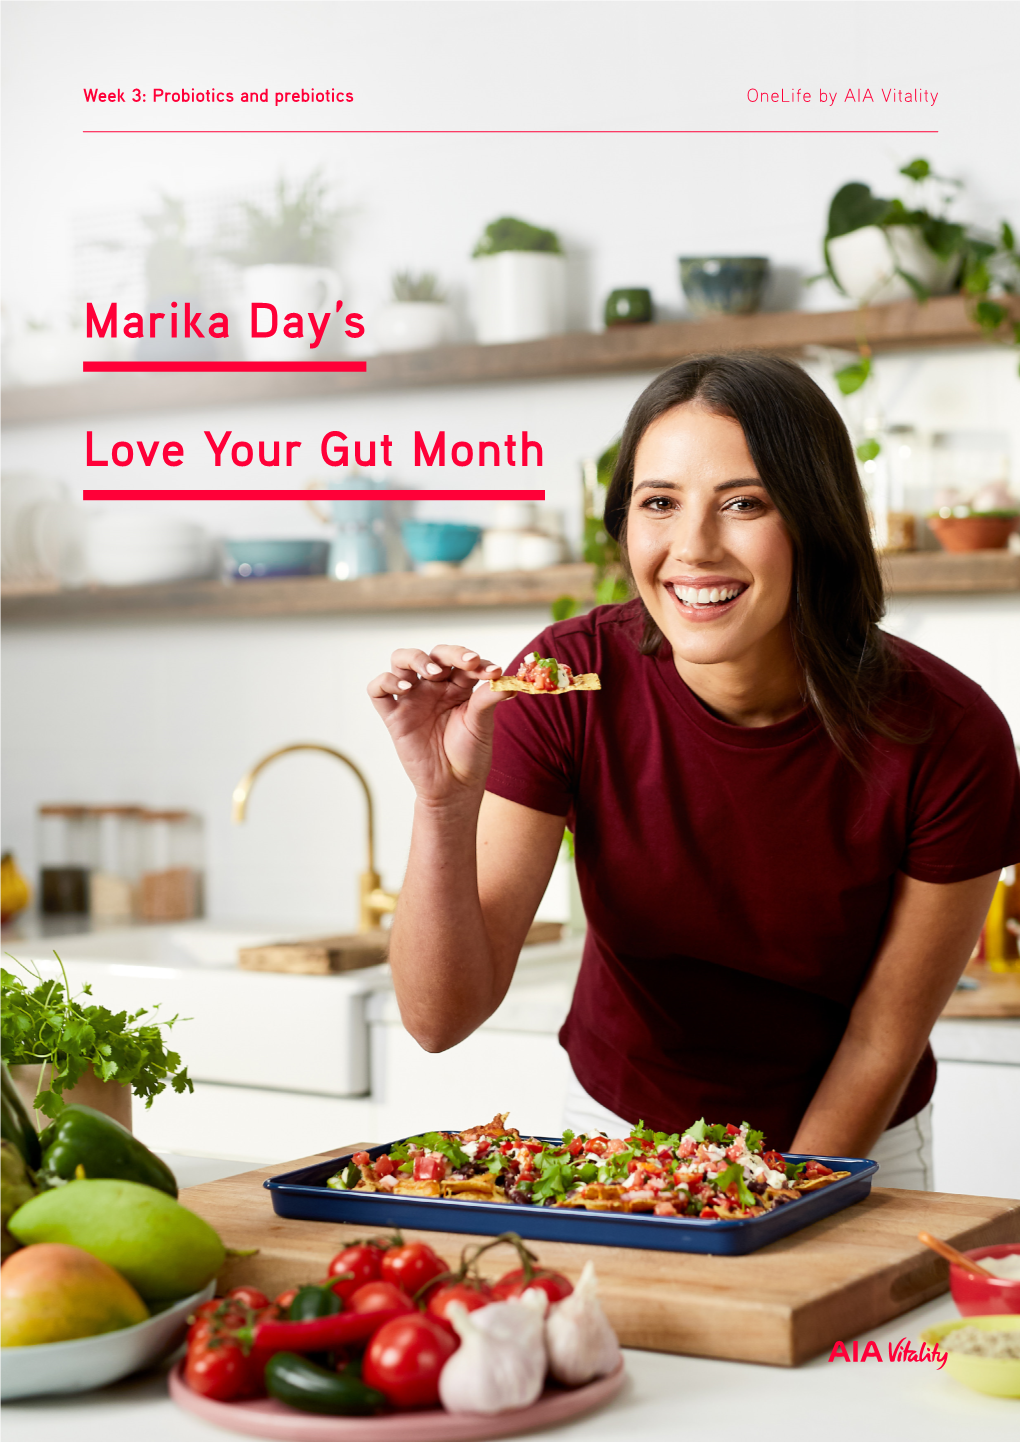 Marika Day's Love Your Gut Month